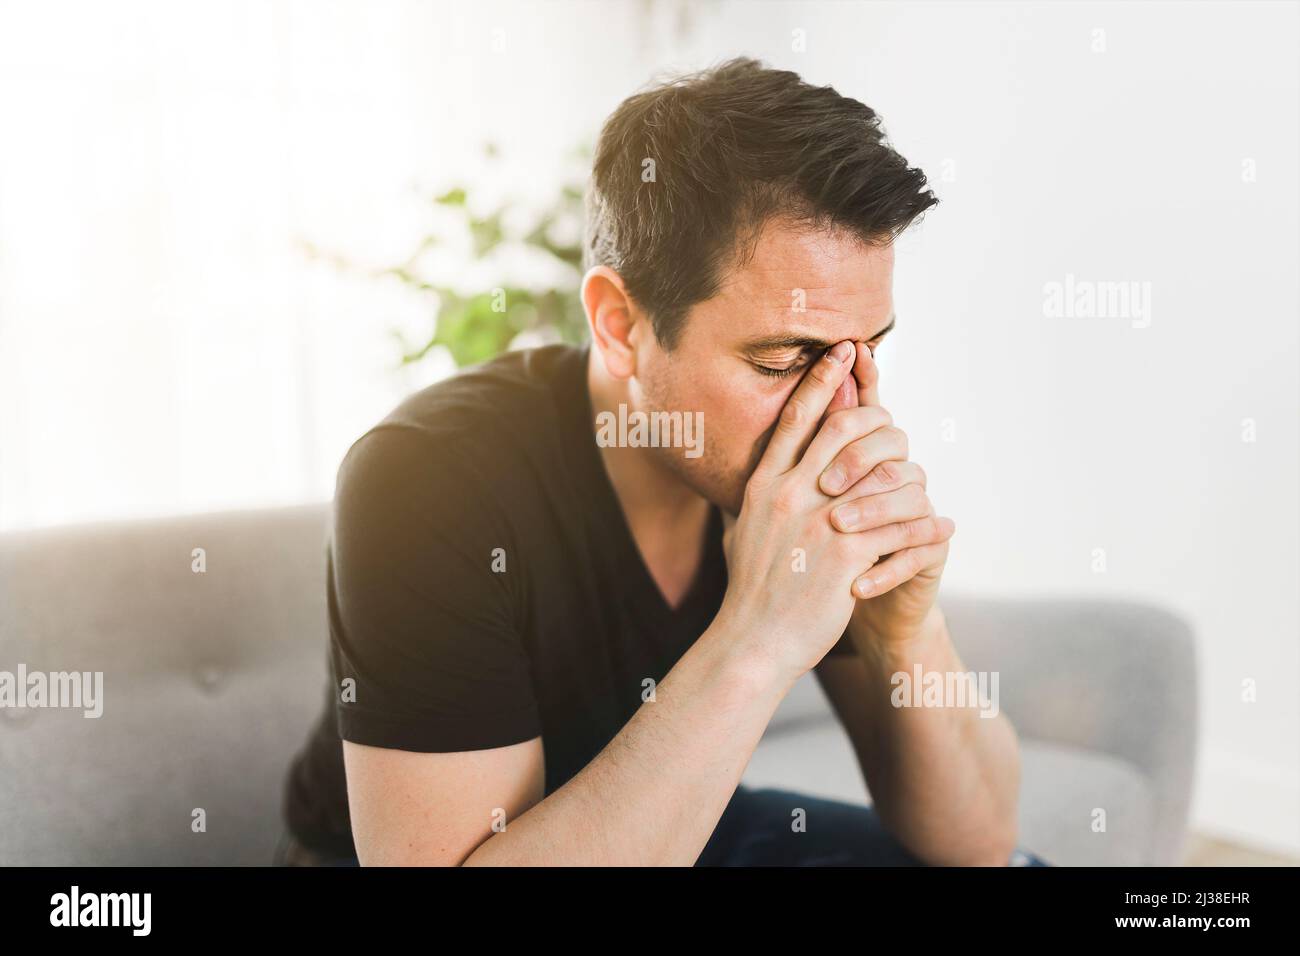 Depressed man thinking at home on couch Stock Photo